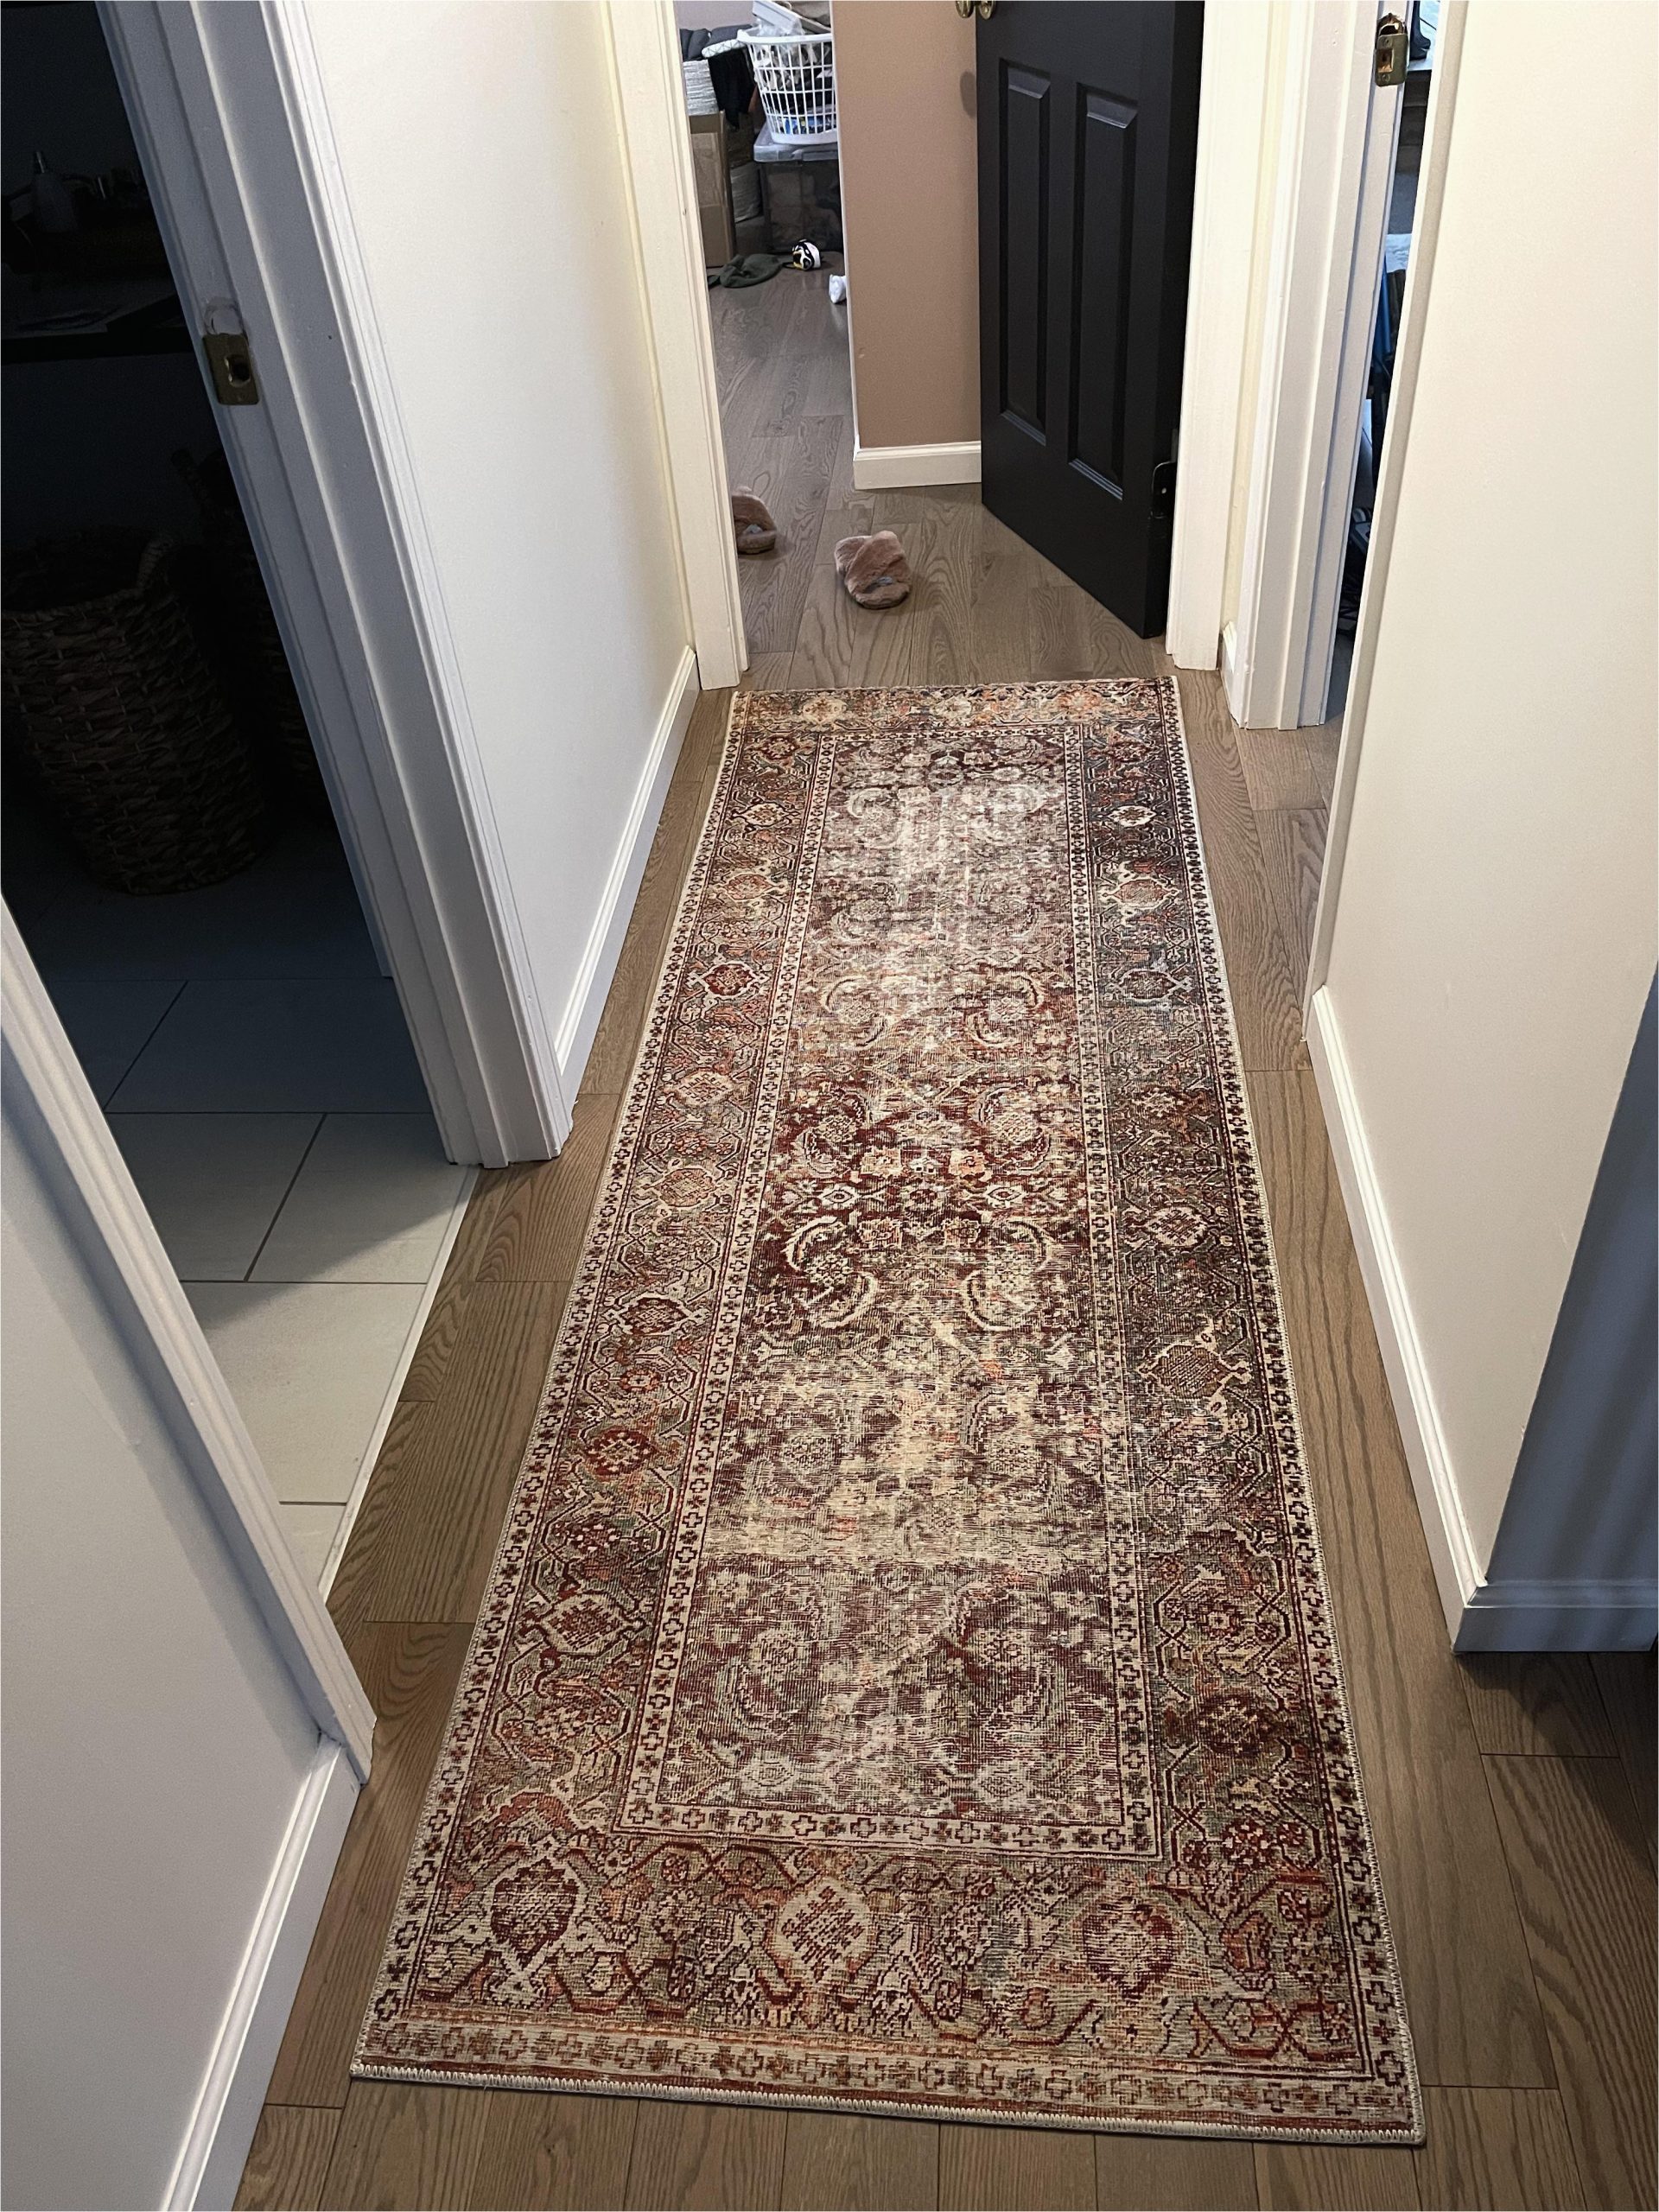 Area Rugs fort Collins Co which Size Looks Better? : R/homedecorating